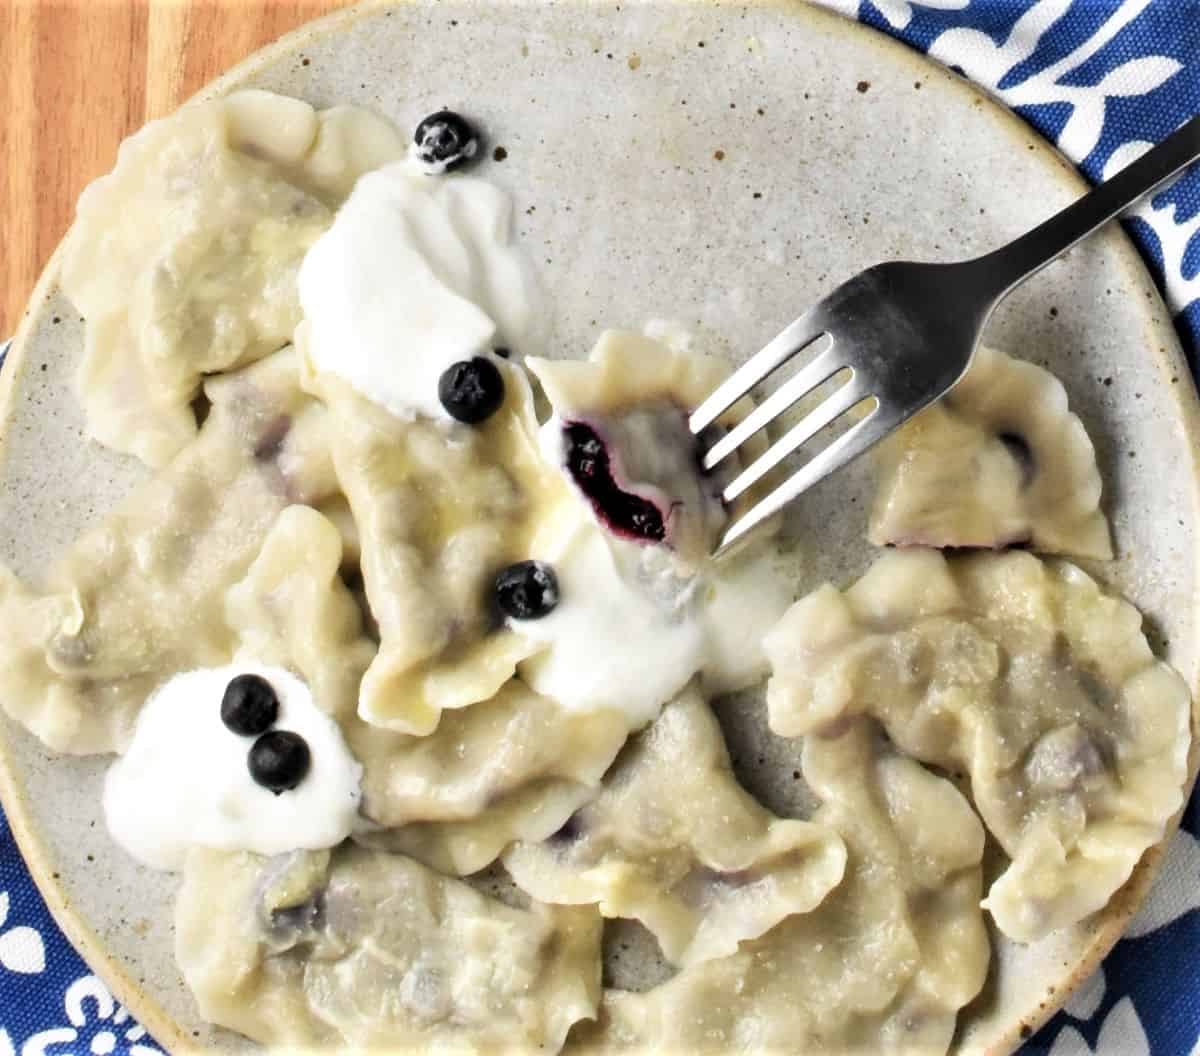 Plate of blueberry pierogi with one pierced with fork.